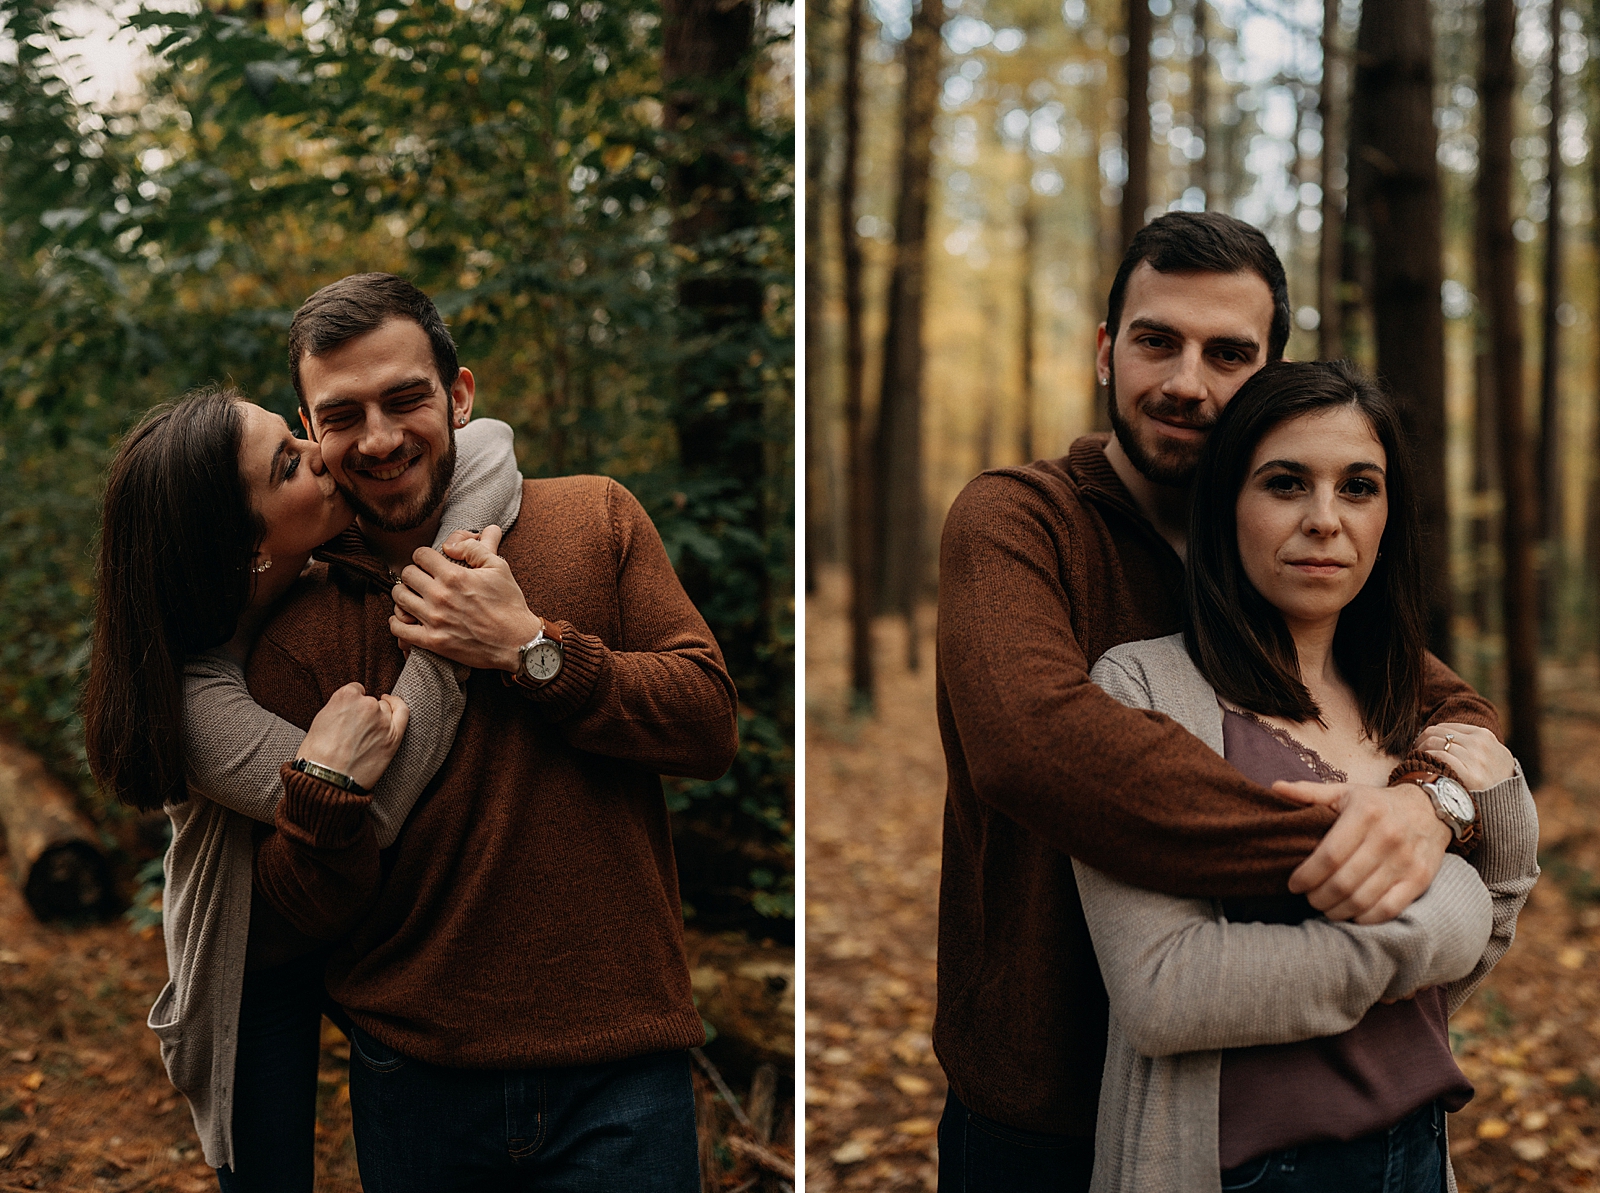 Woman wrapping arms around man in the forest